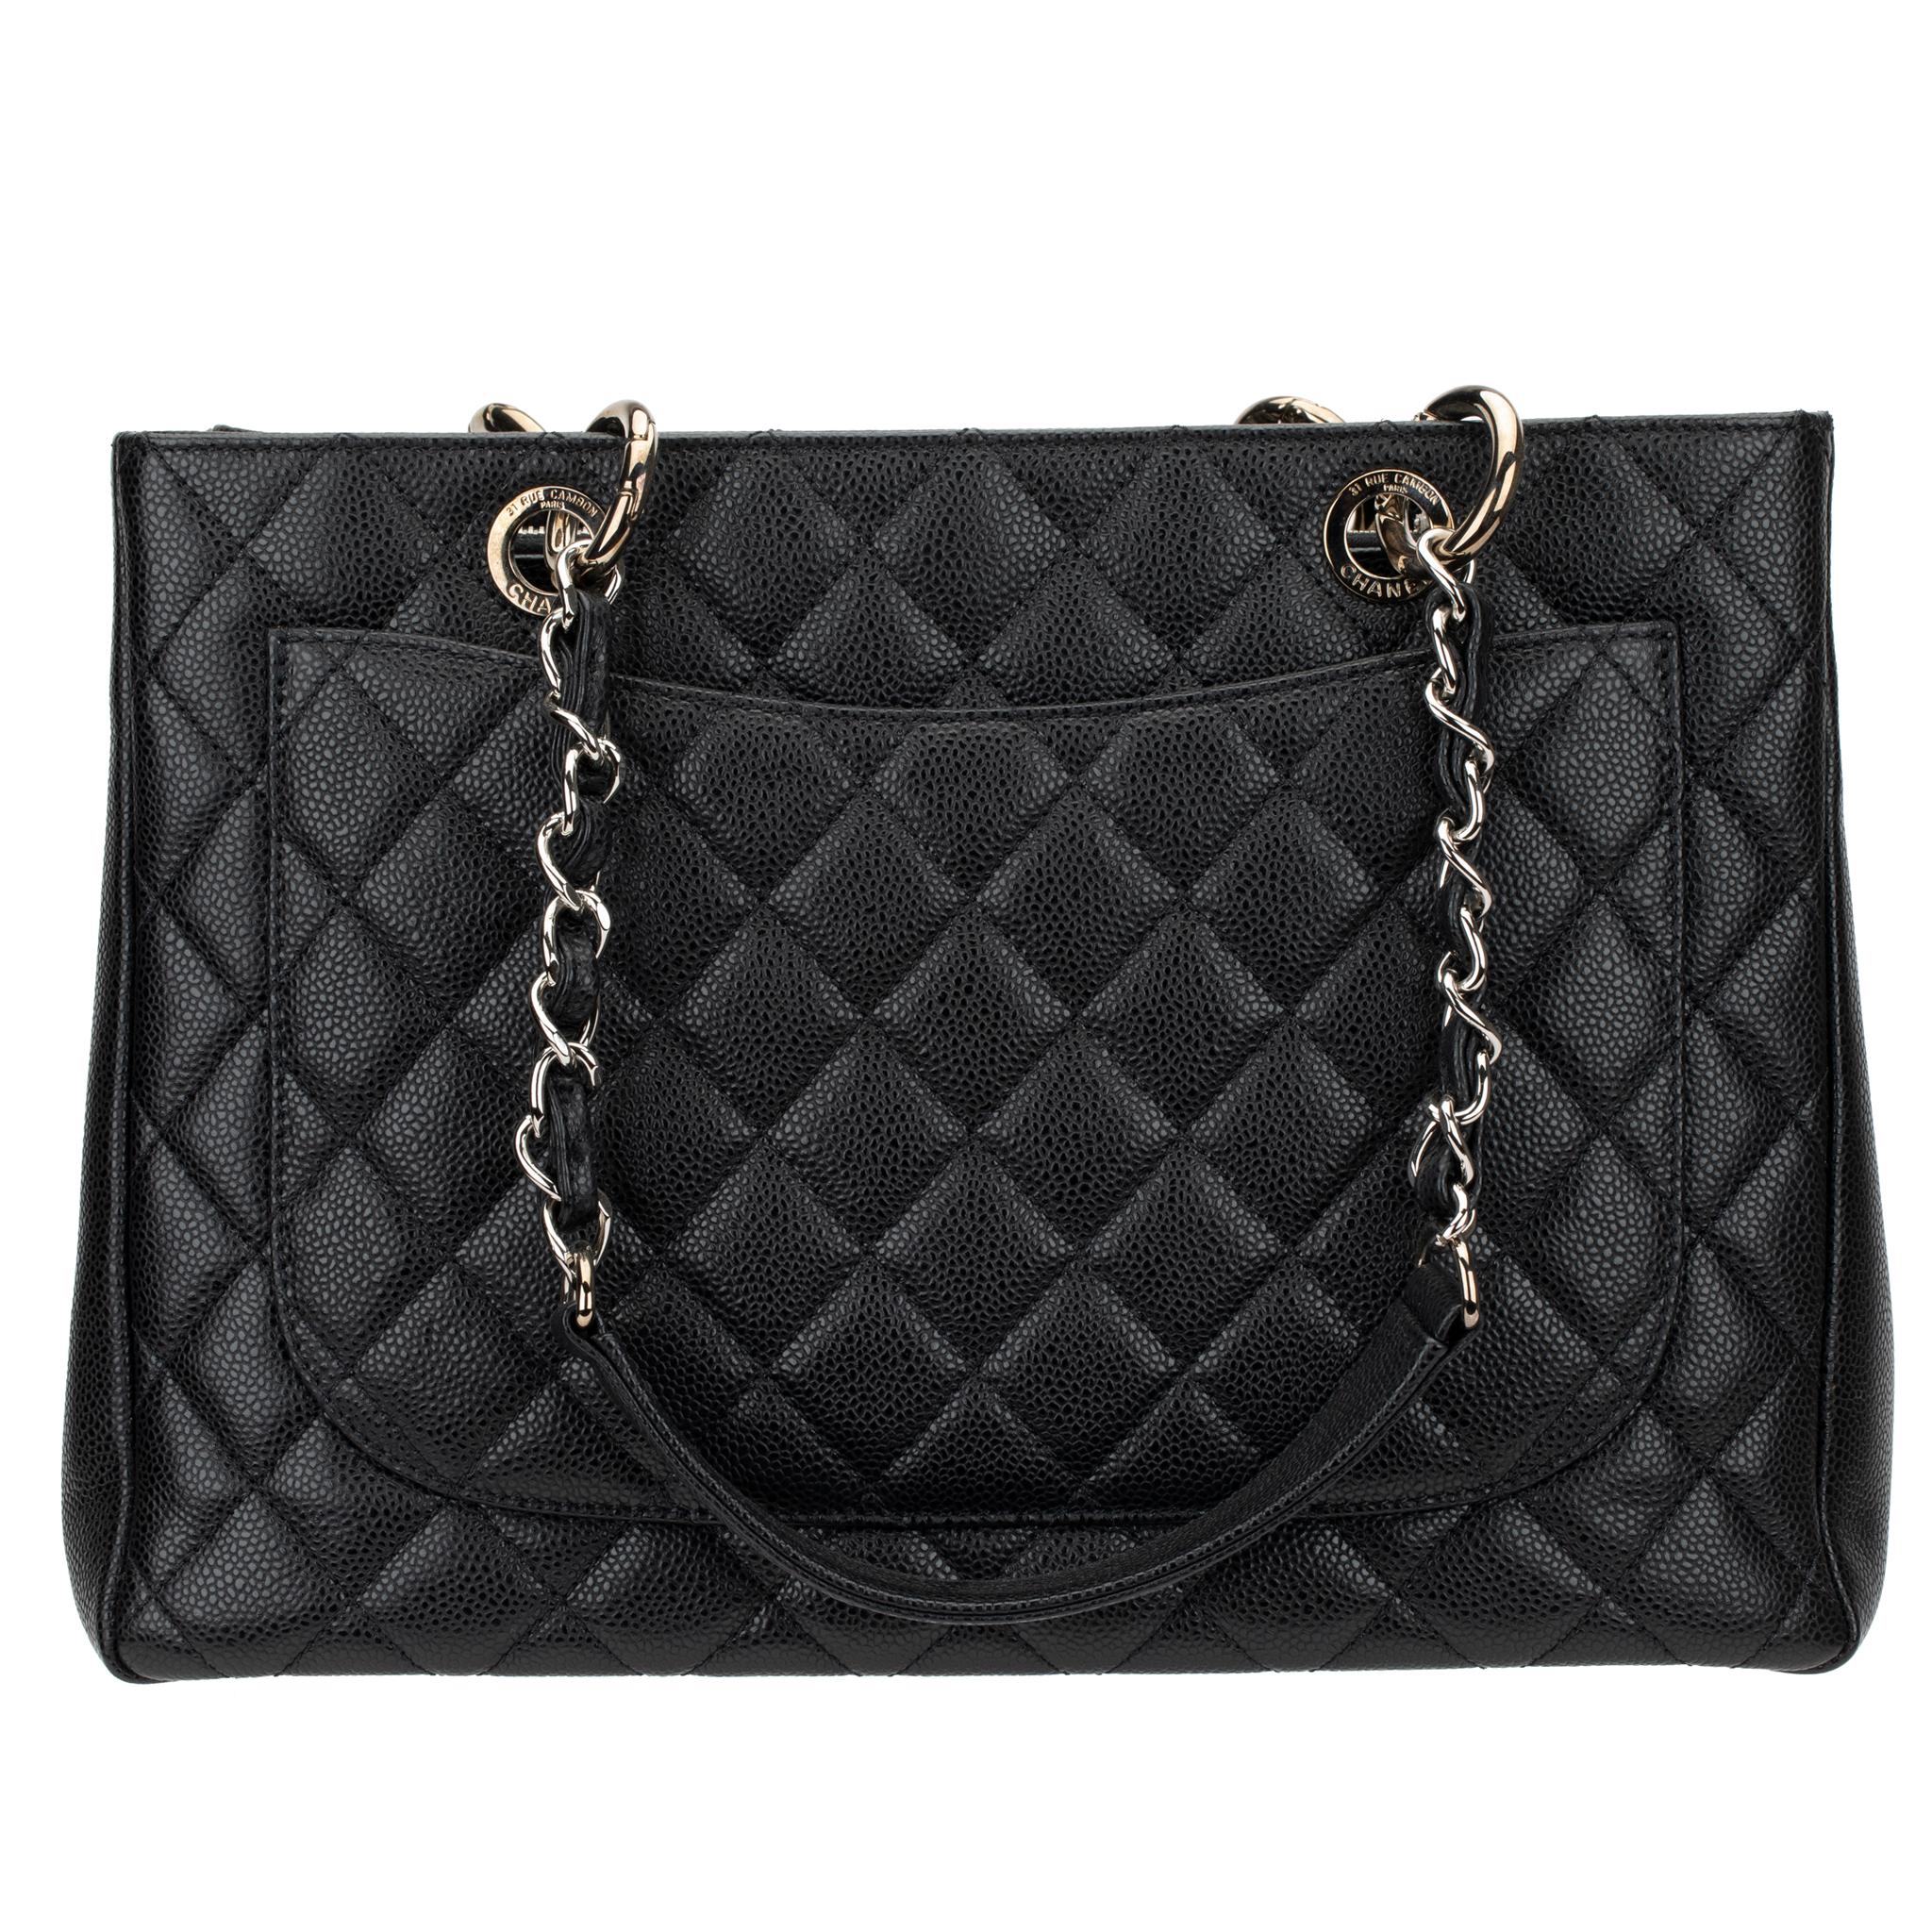 Chanel GST Black Quilted Caviar Leather Silver-Tone Hardware 7